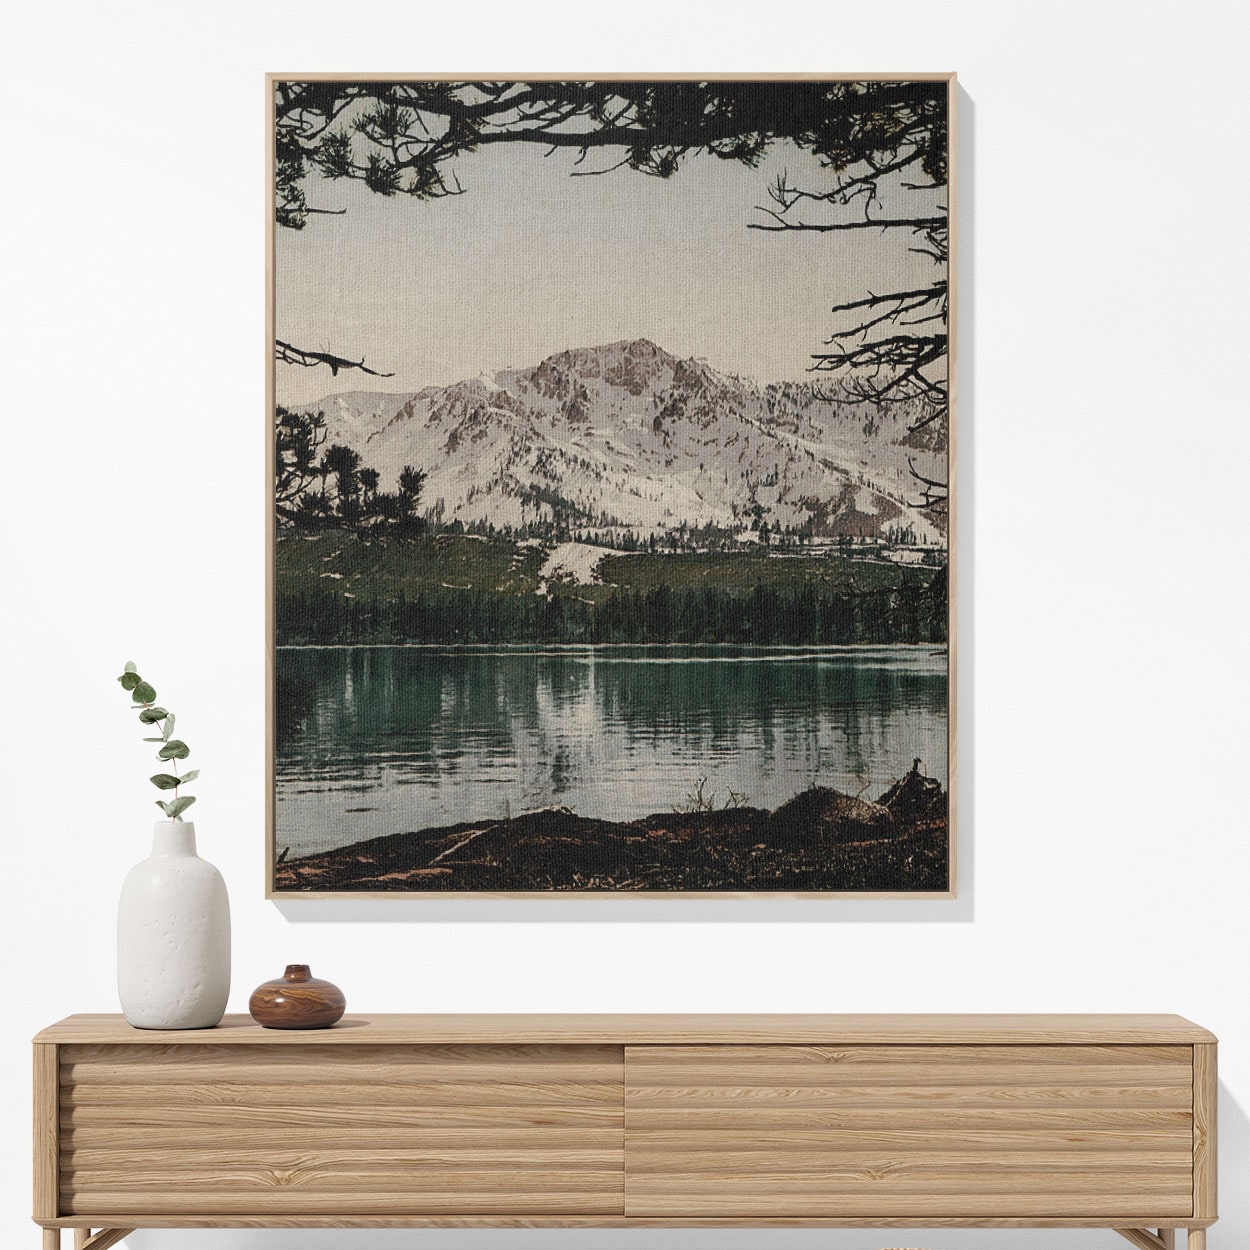 Snowy Mountains Woven Blanket Woven Blanket Hanging on a Wall as Framed Wall Art